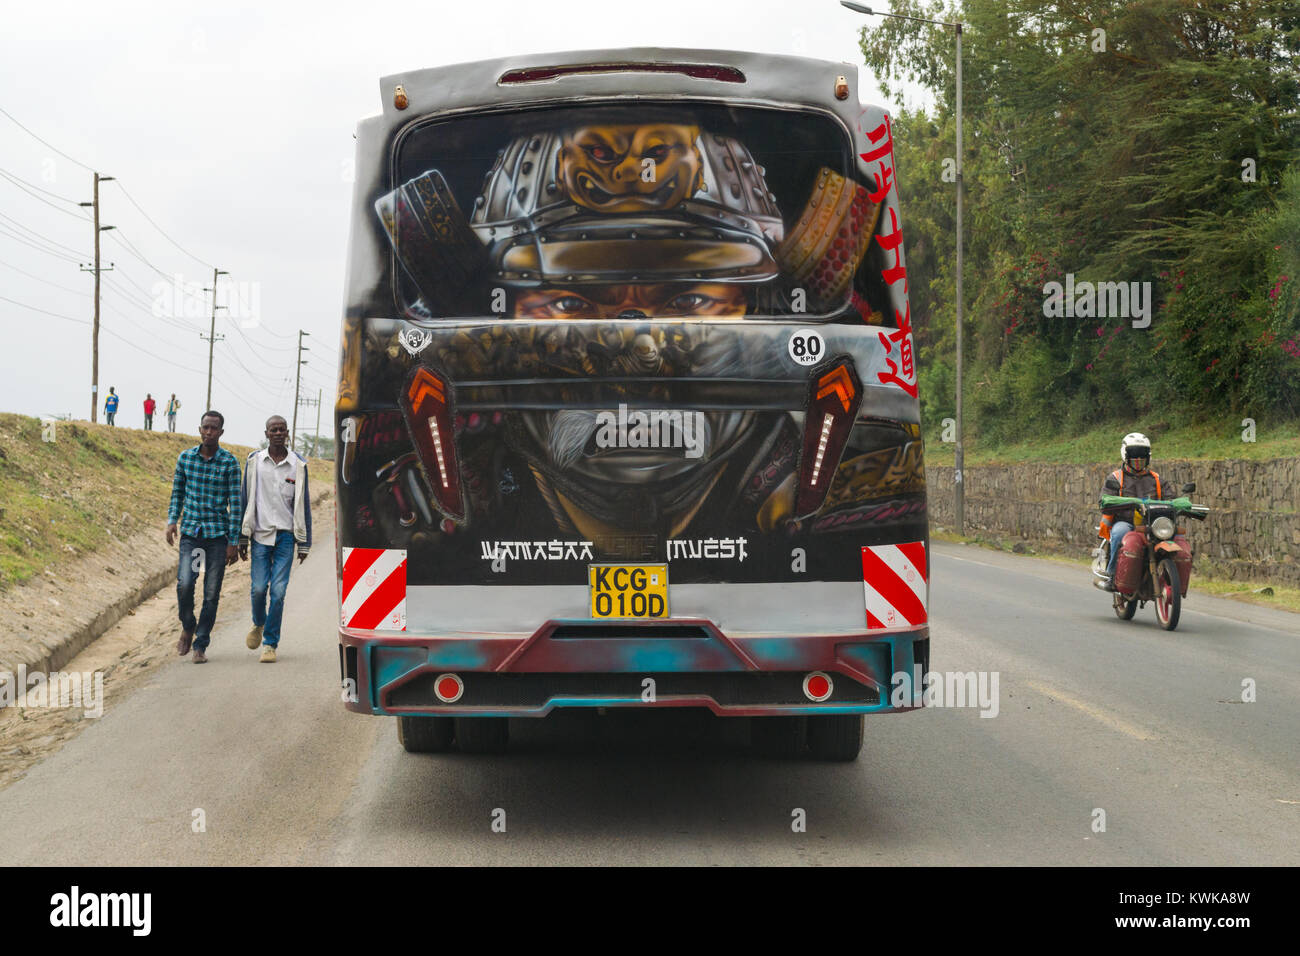 A bus decorated in artwork depicting a Japanese samurai, Kenya, East Africa Stock Photo